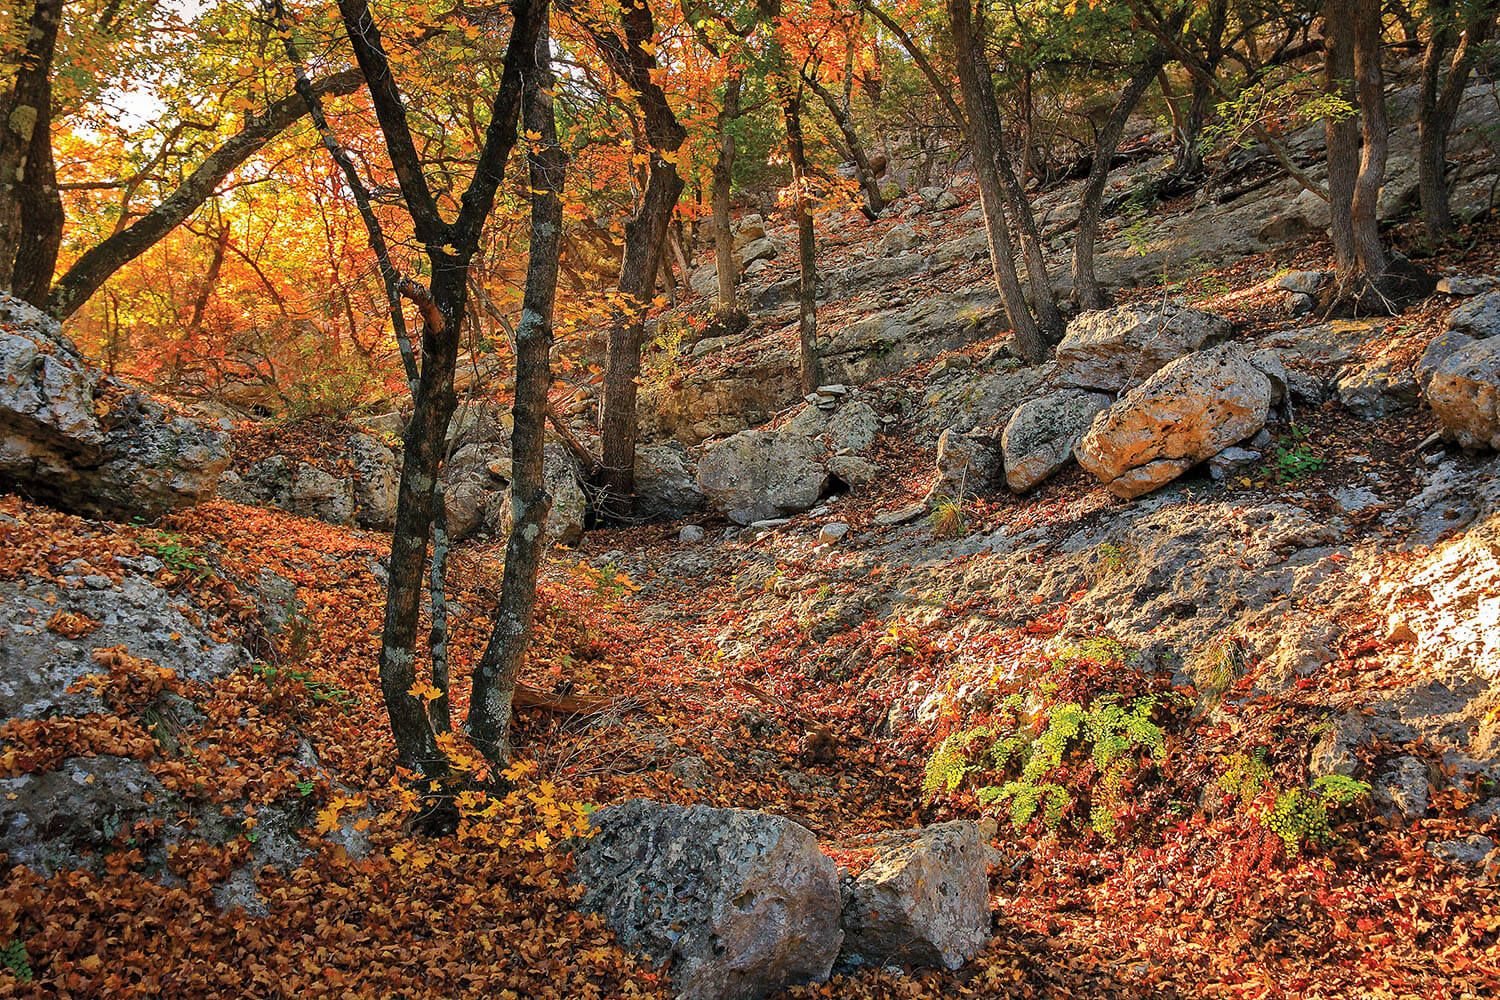 Tall trees with bright orange leaves beneath in a rocky outdoor scene